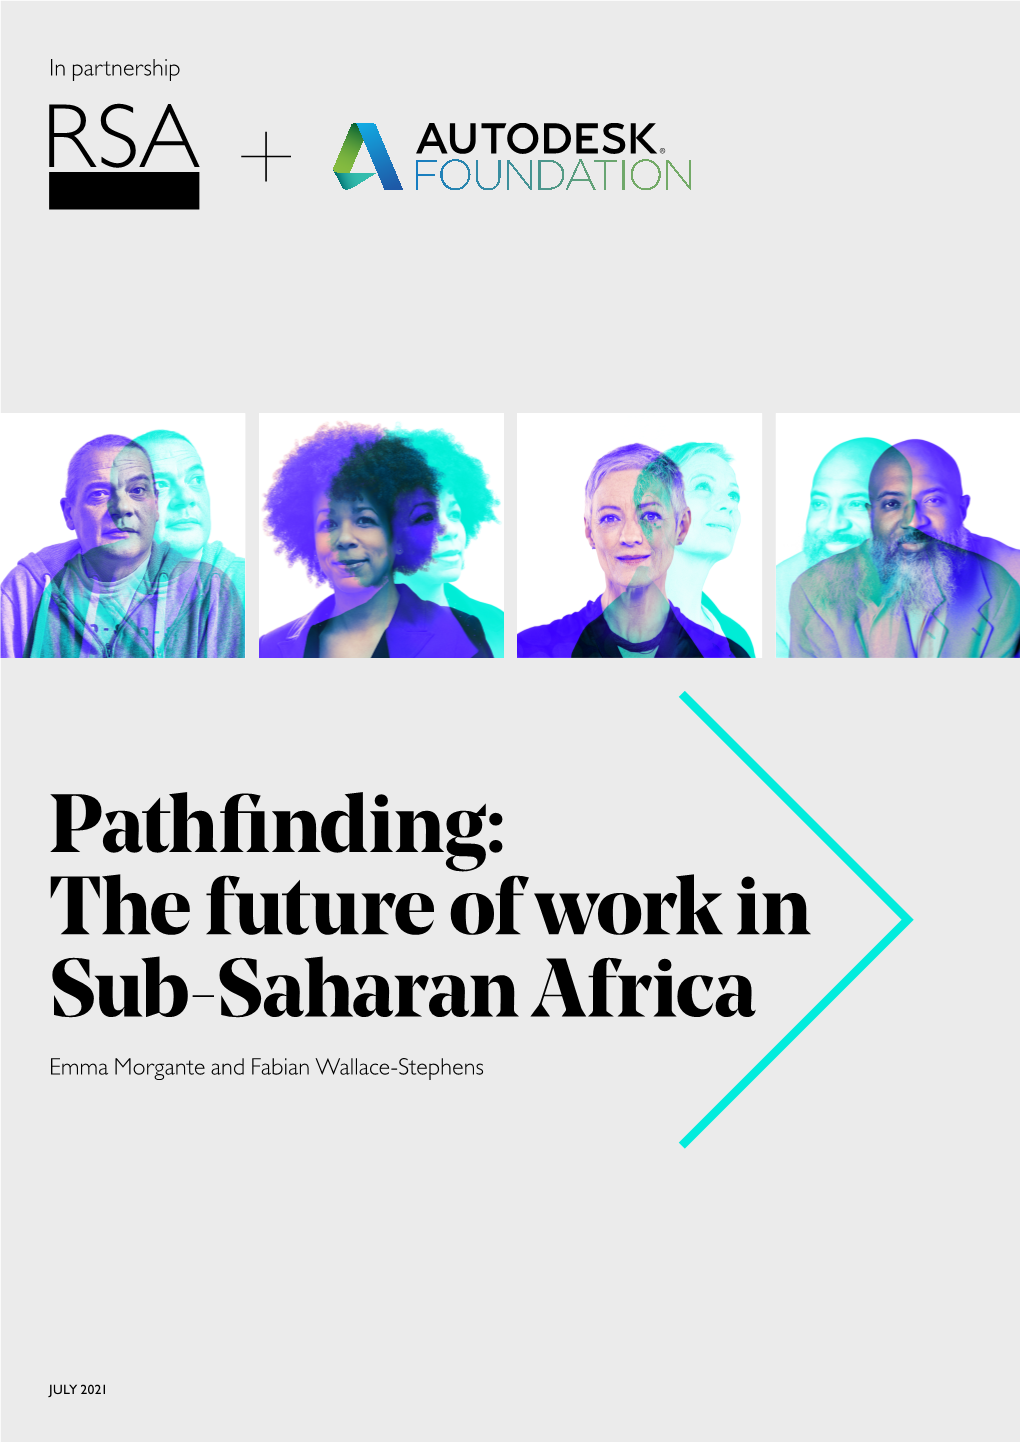 The Future of Work in Sub-Saharan Africa Emma Morgante and Fabian Wallace-Stephens